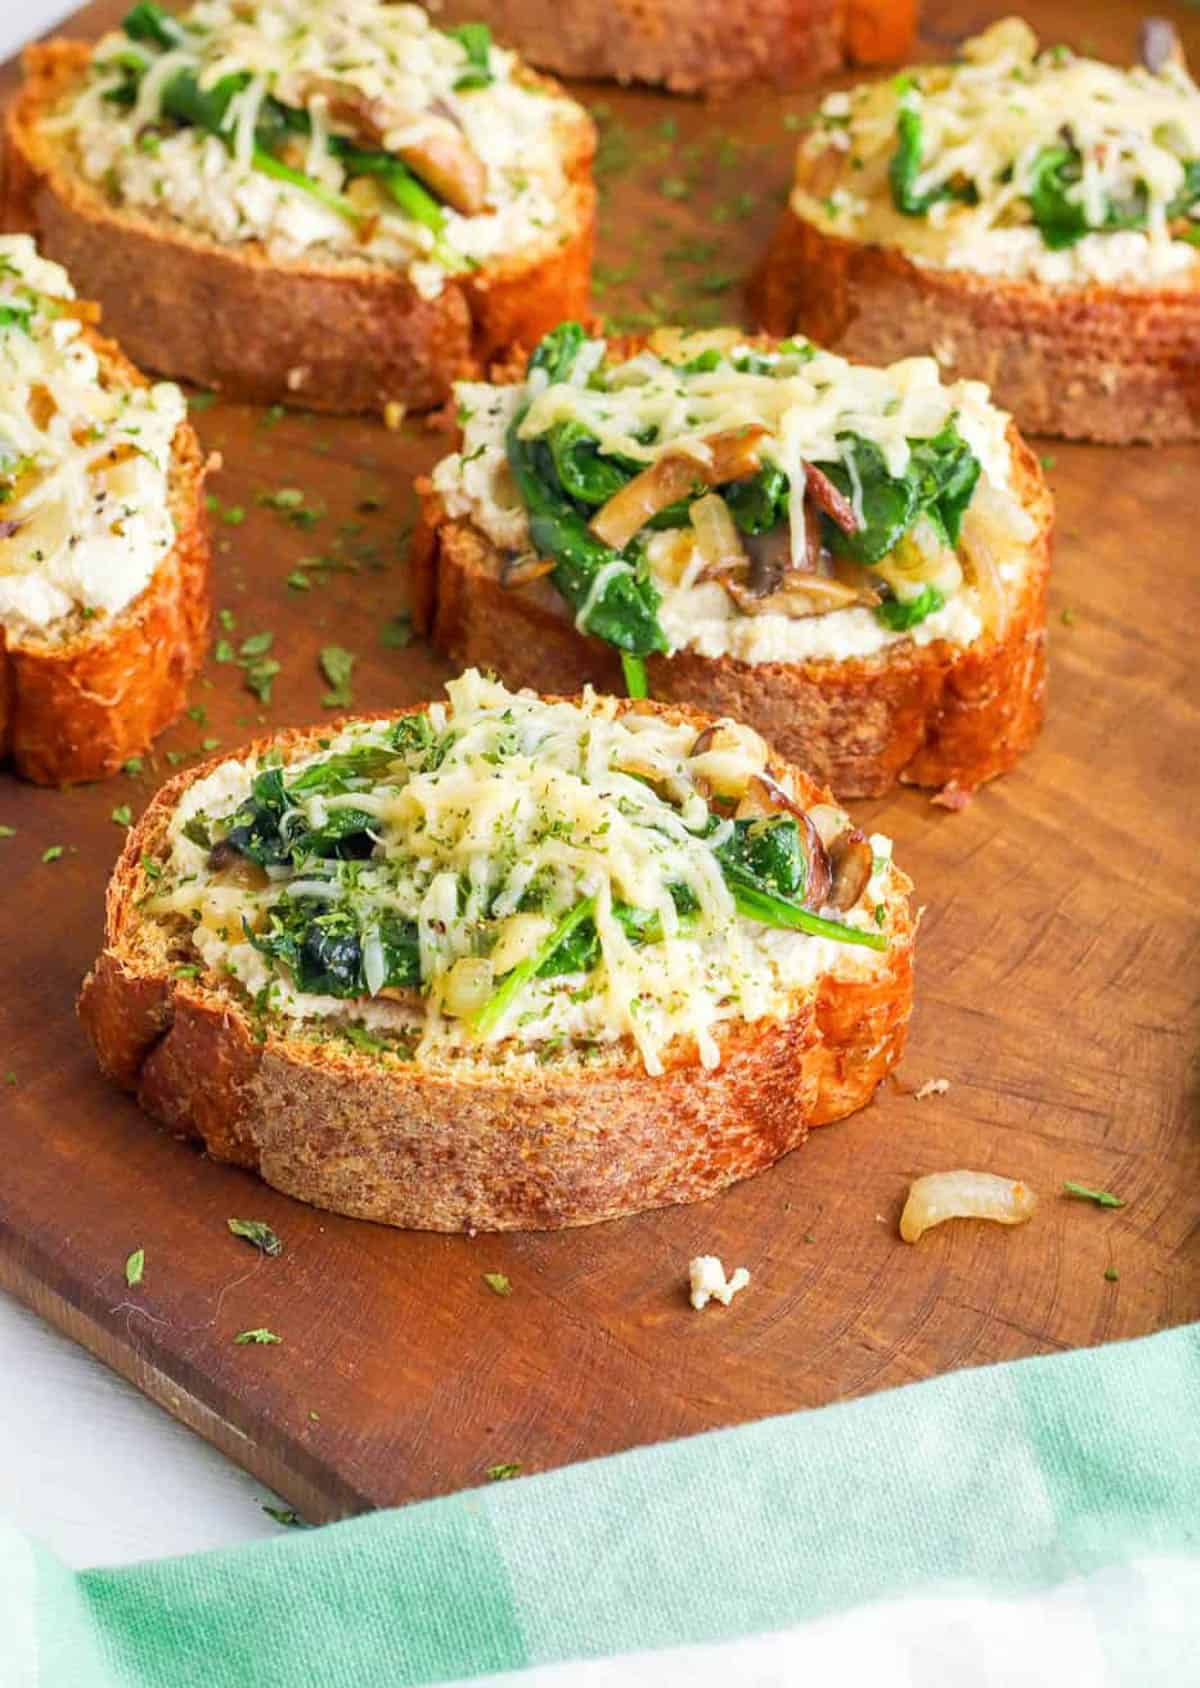 Mushroom toast with spinach and roasted garlic on a wooden cutting board.